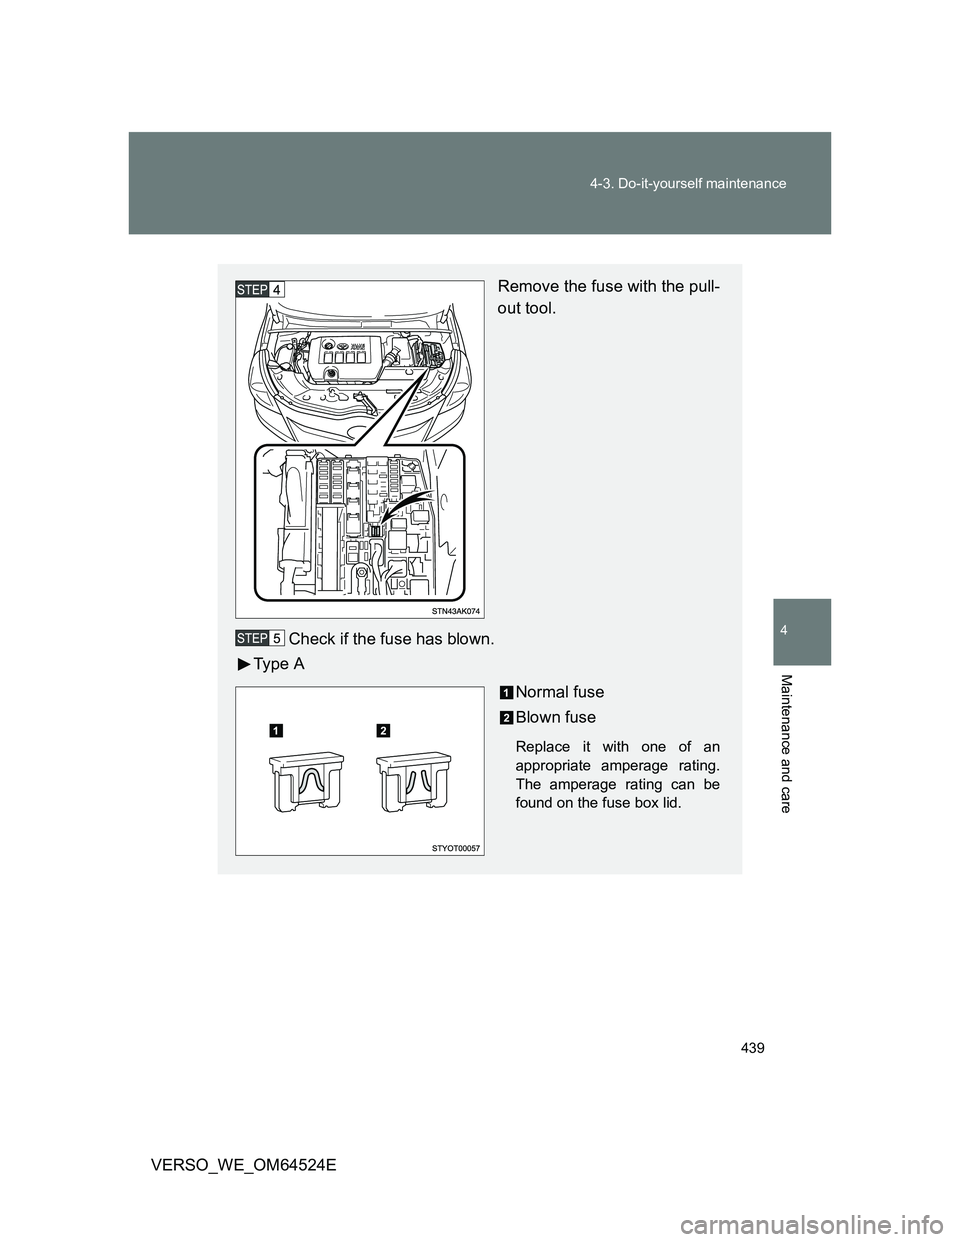 TOYOTA VERSO 2012  Owners Manual 439 4-3. Do-it-yourself maintenance
4
Maintenance and care
VERSO_WE_OM64524E
Remove the fuse with the pull-
out tool.
Check if the fuse has blown.
Ty p e  A
Normal fuse
Blown fuse
Replace it with one 